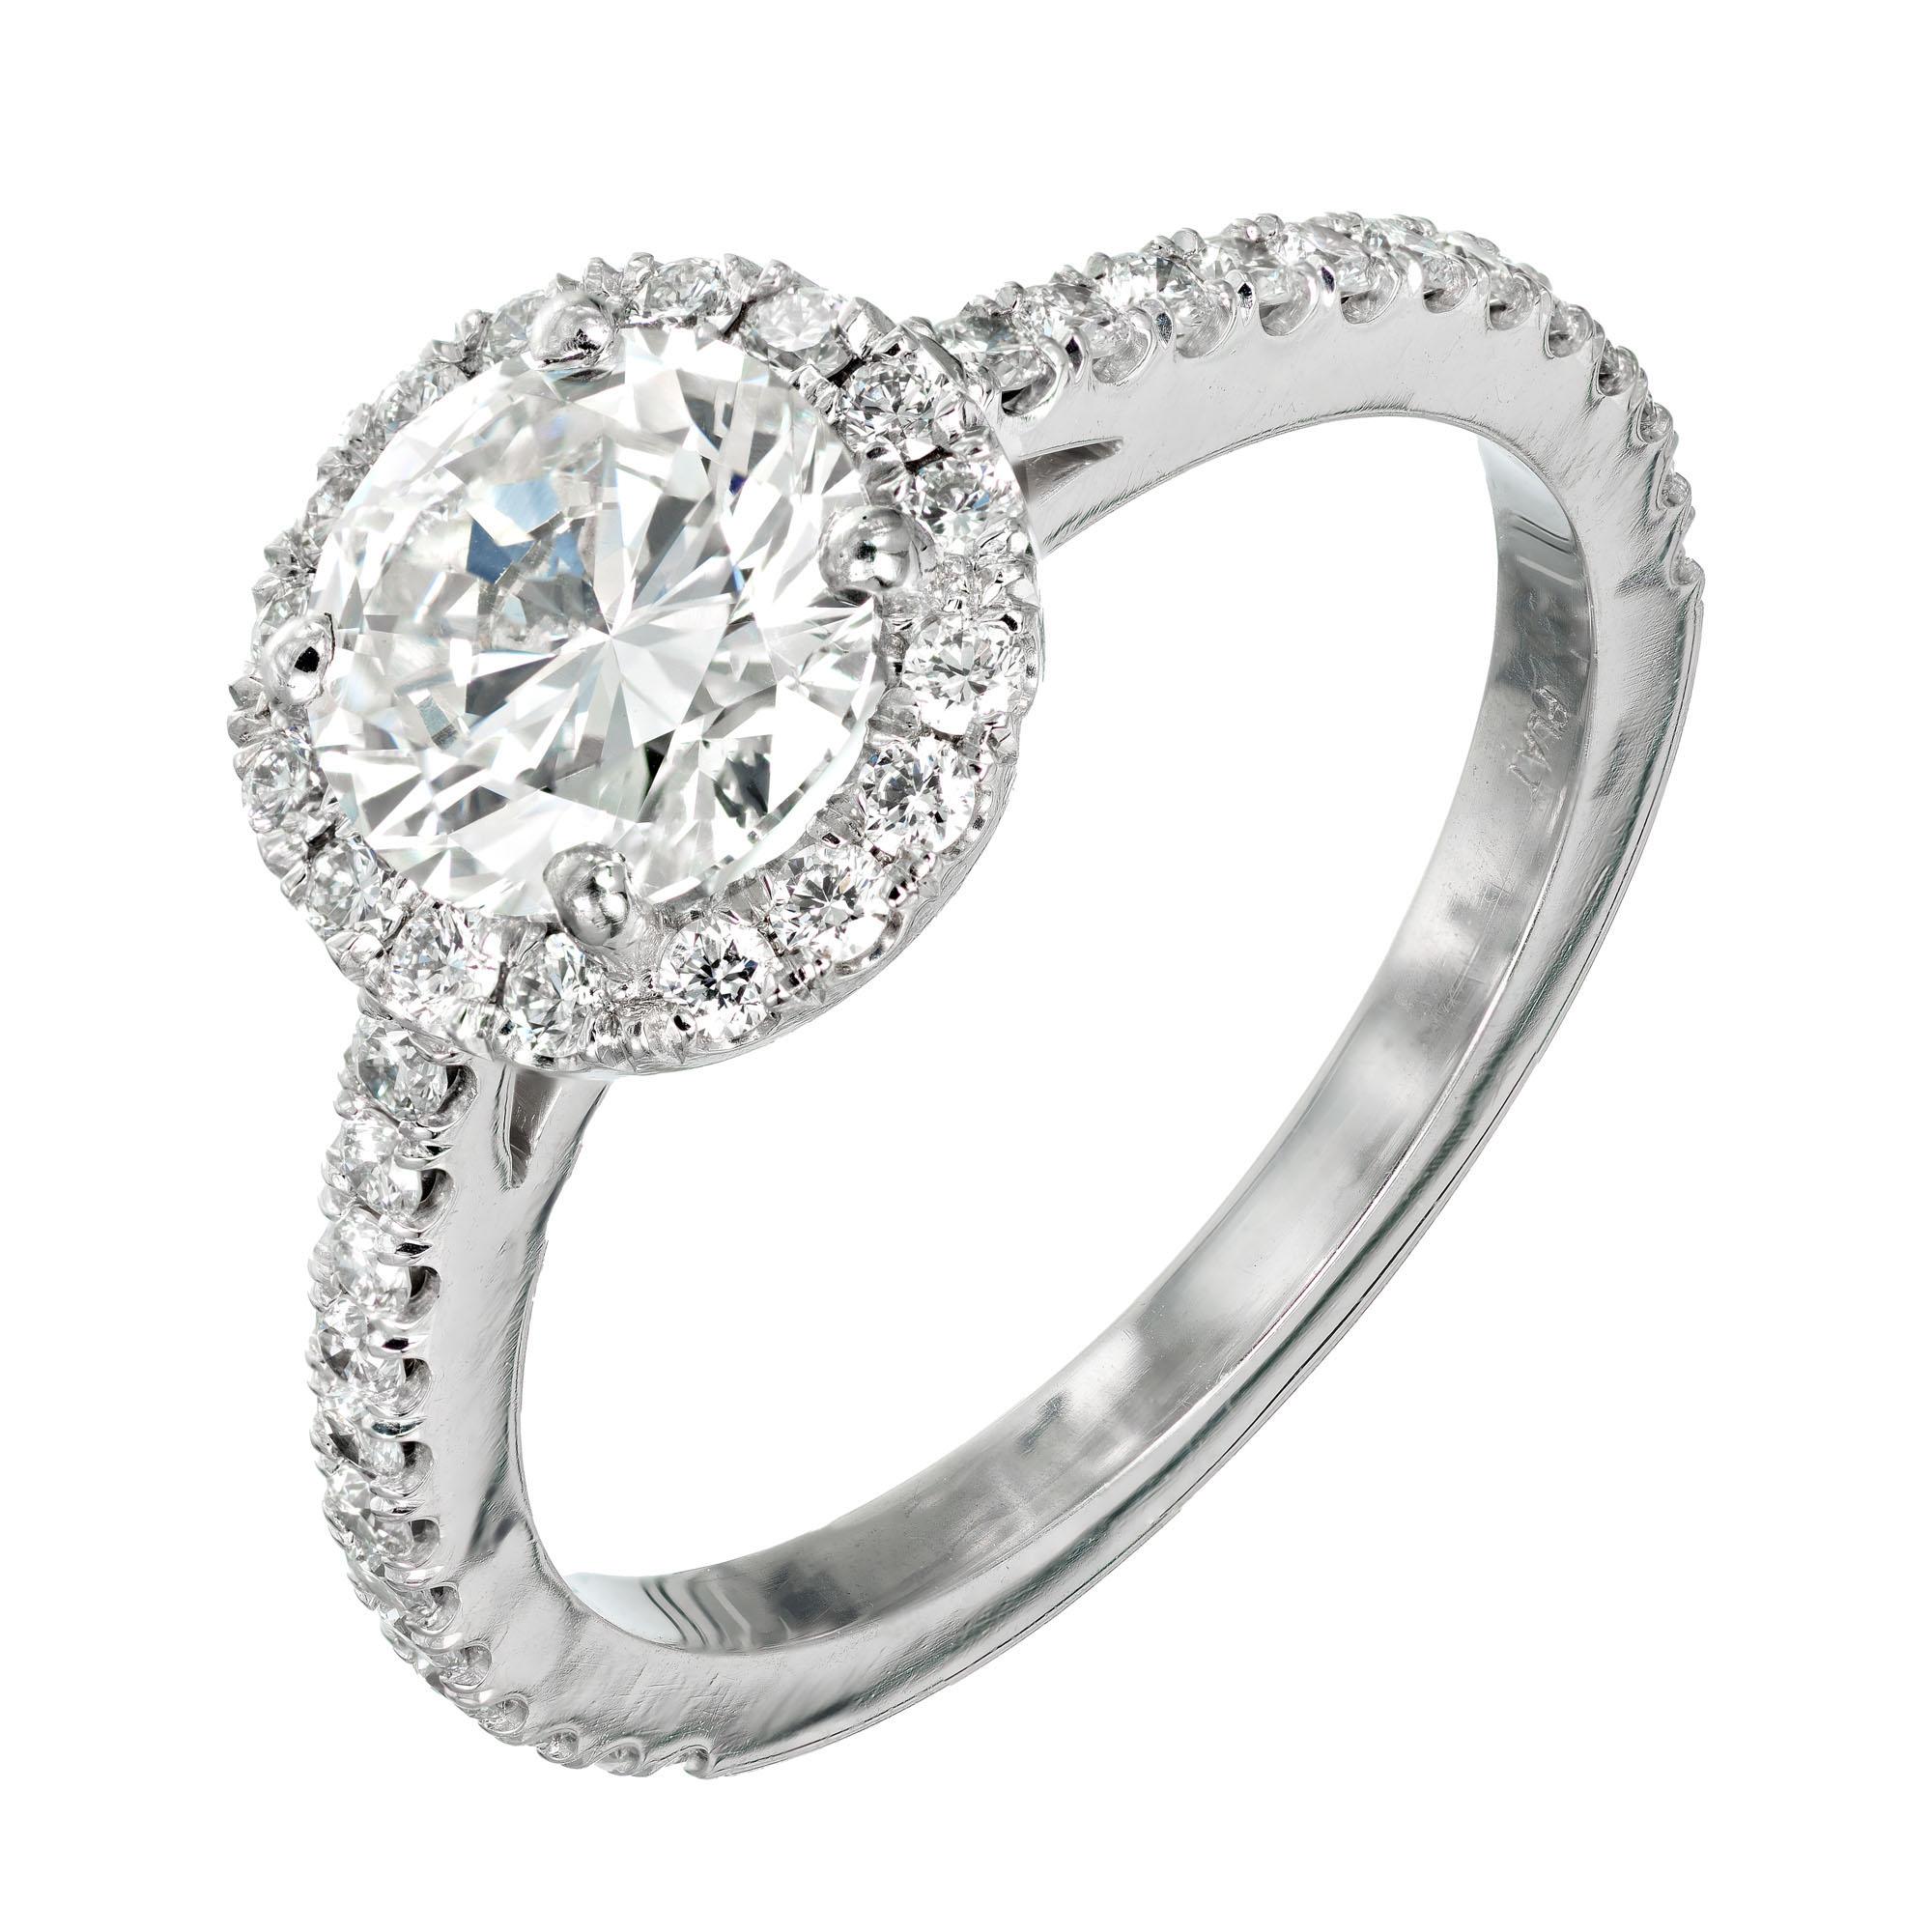 Peter Suchy round brilliant cut diamond ring. GIA certified center stone with a halo of round diamonds in a platinum solitaire setting. Specially set low to the hand for comfort with the side designed to fit a wedding band flush to the ring. 

1